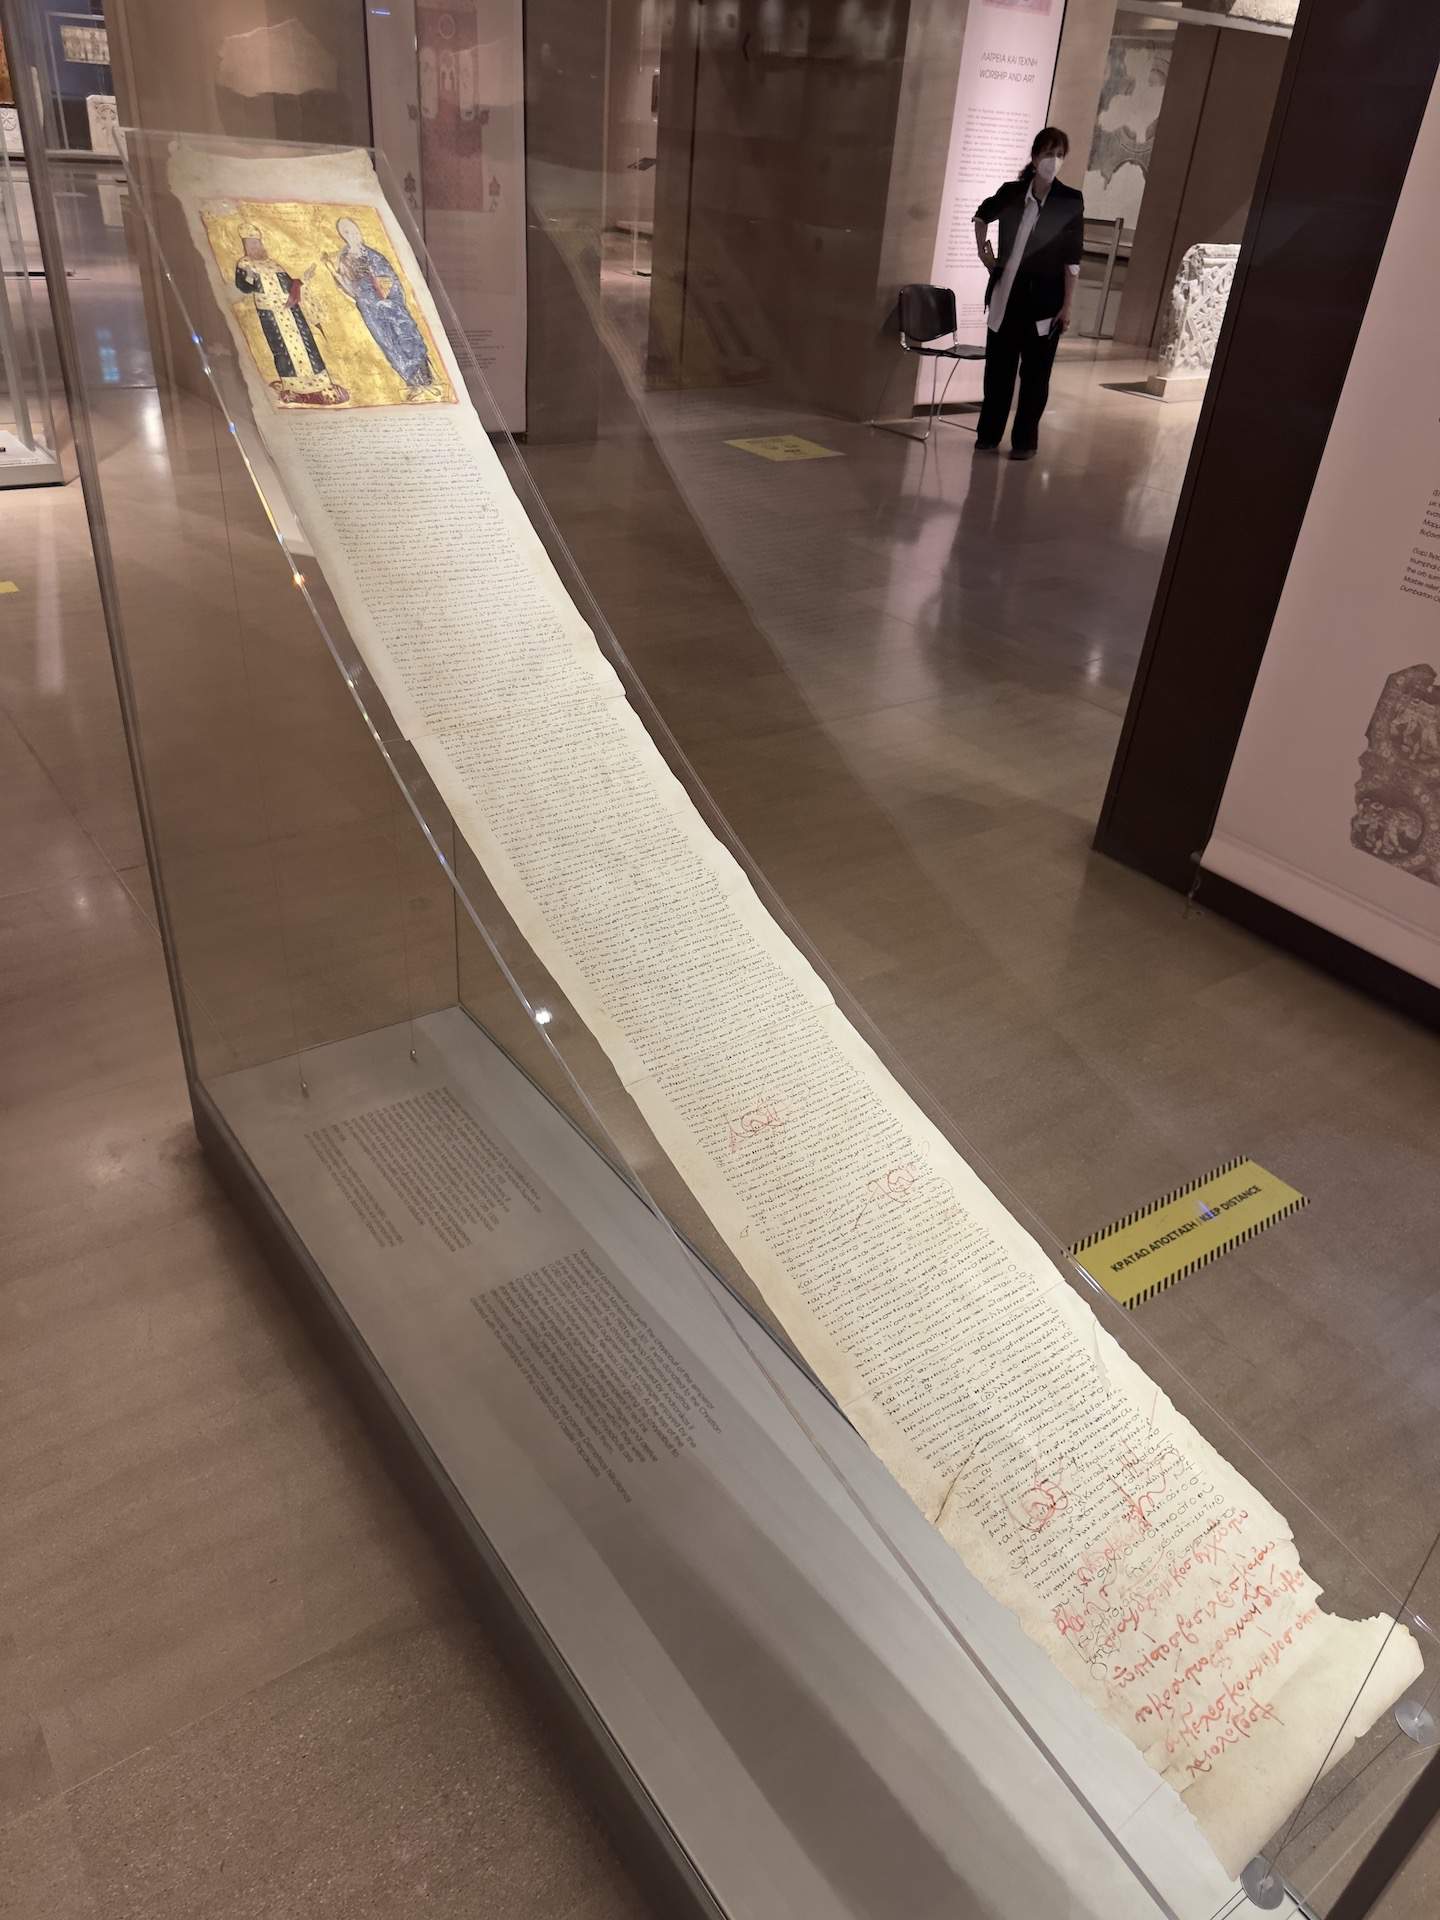 Manuscript parchment scroll with the chrysobull of the emperor Andronikos II, from Monemvasia, 1301 at the Byzantine Museum in Athens, Greece